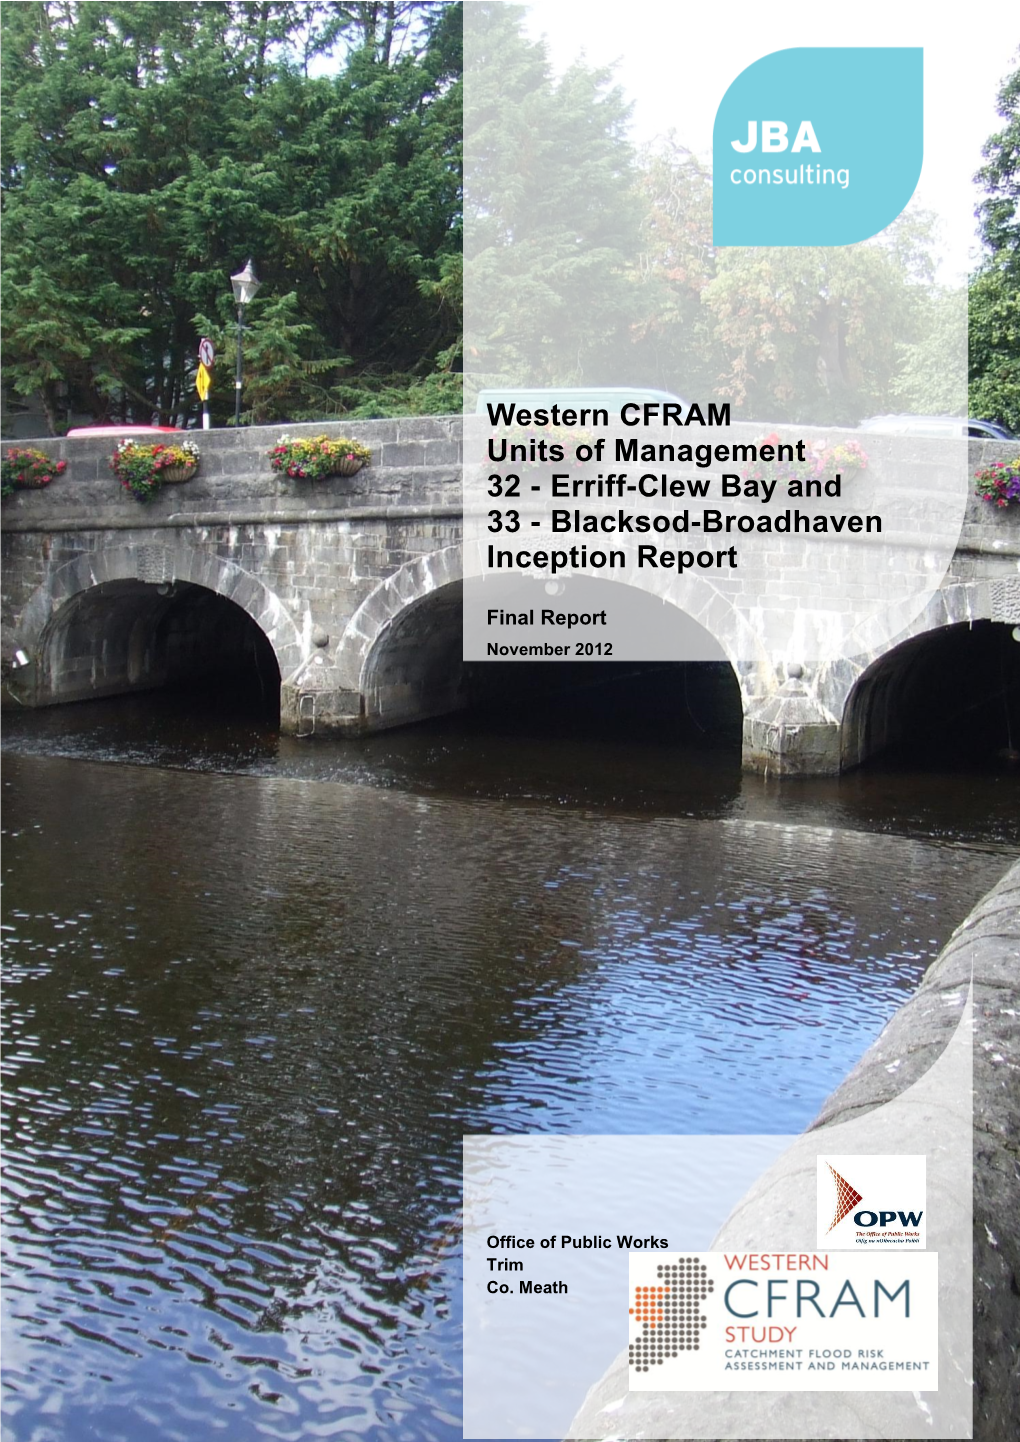 Western CFRAM Units of Management 32 - Erriff-Clew Bay and 33 - Blacksod-Broadhaven Inception Report